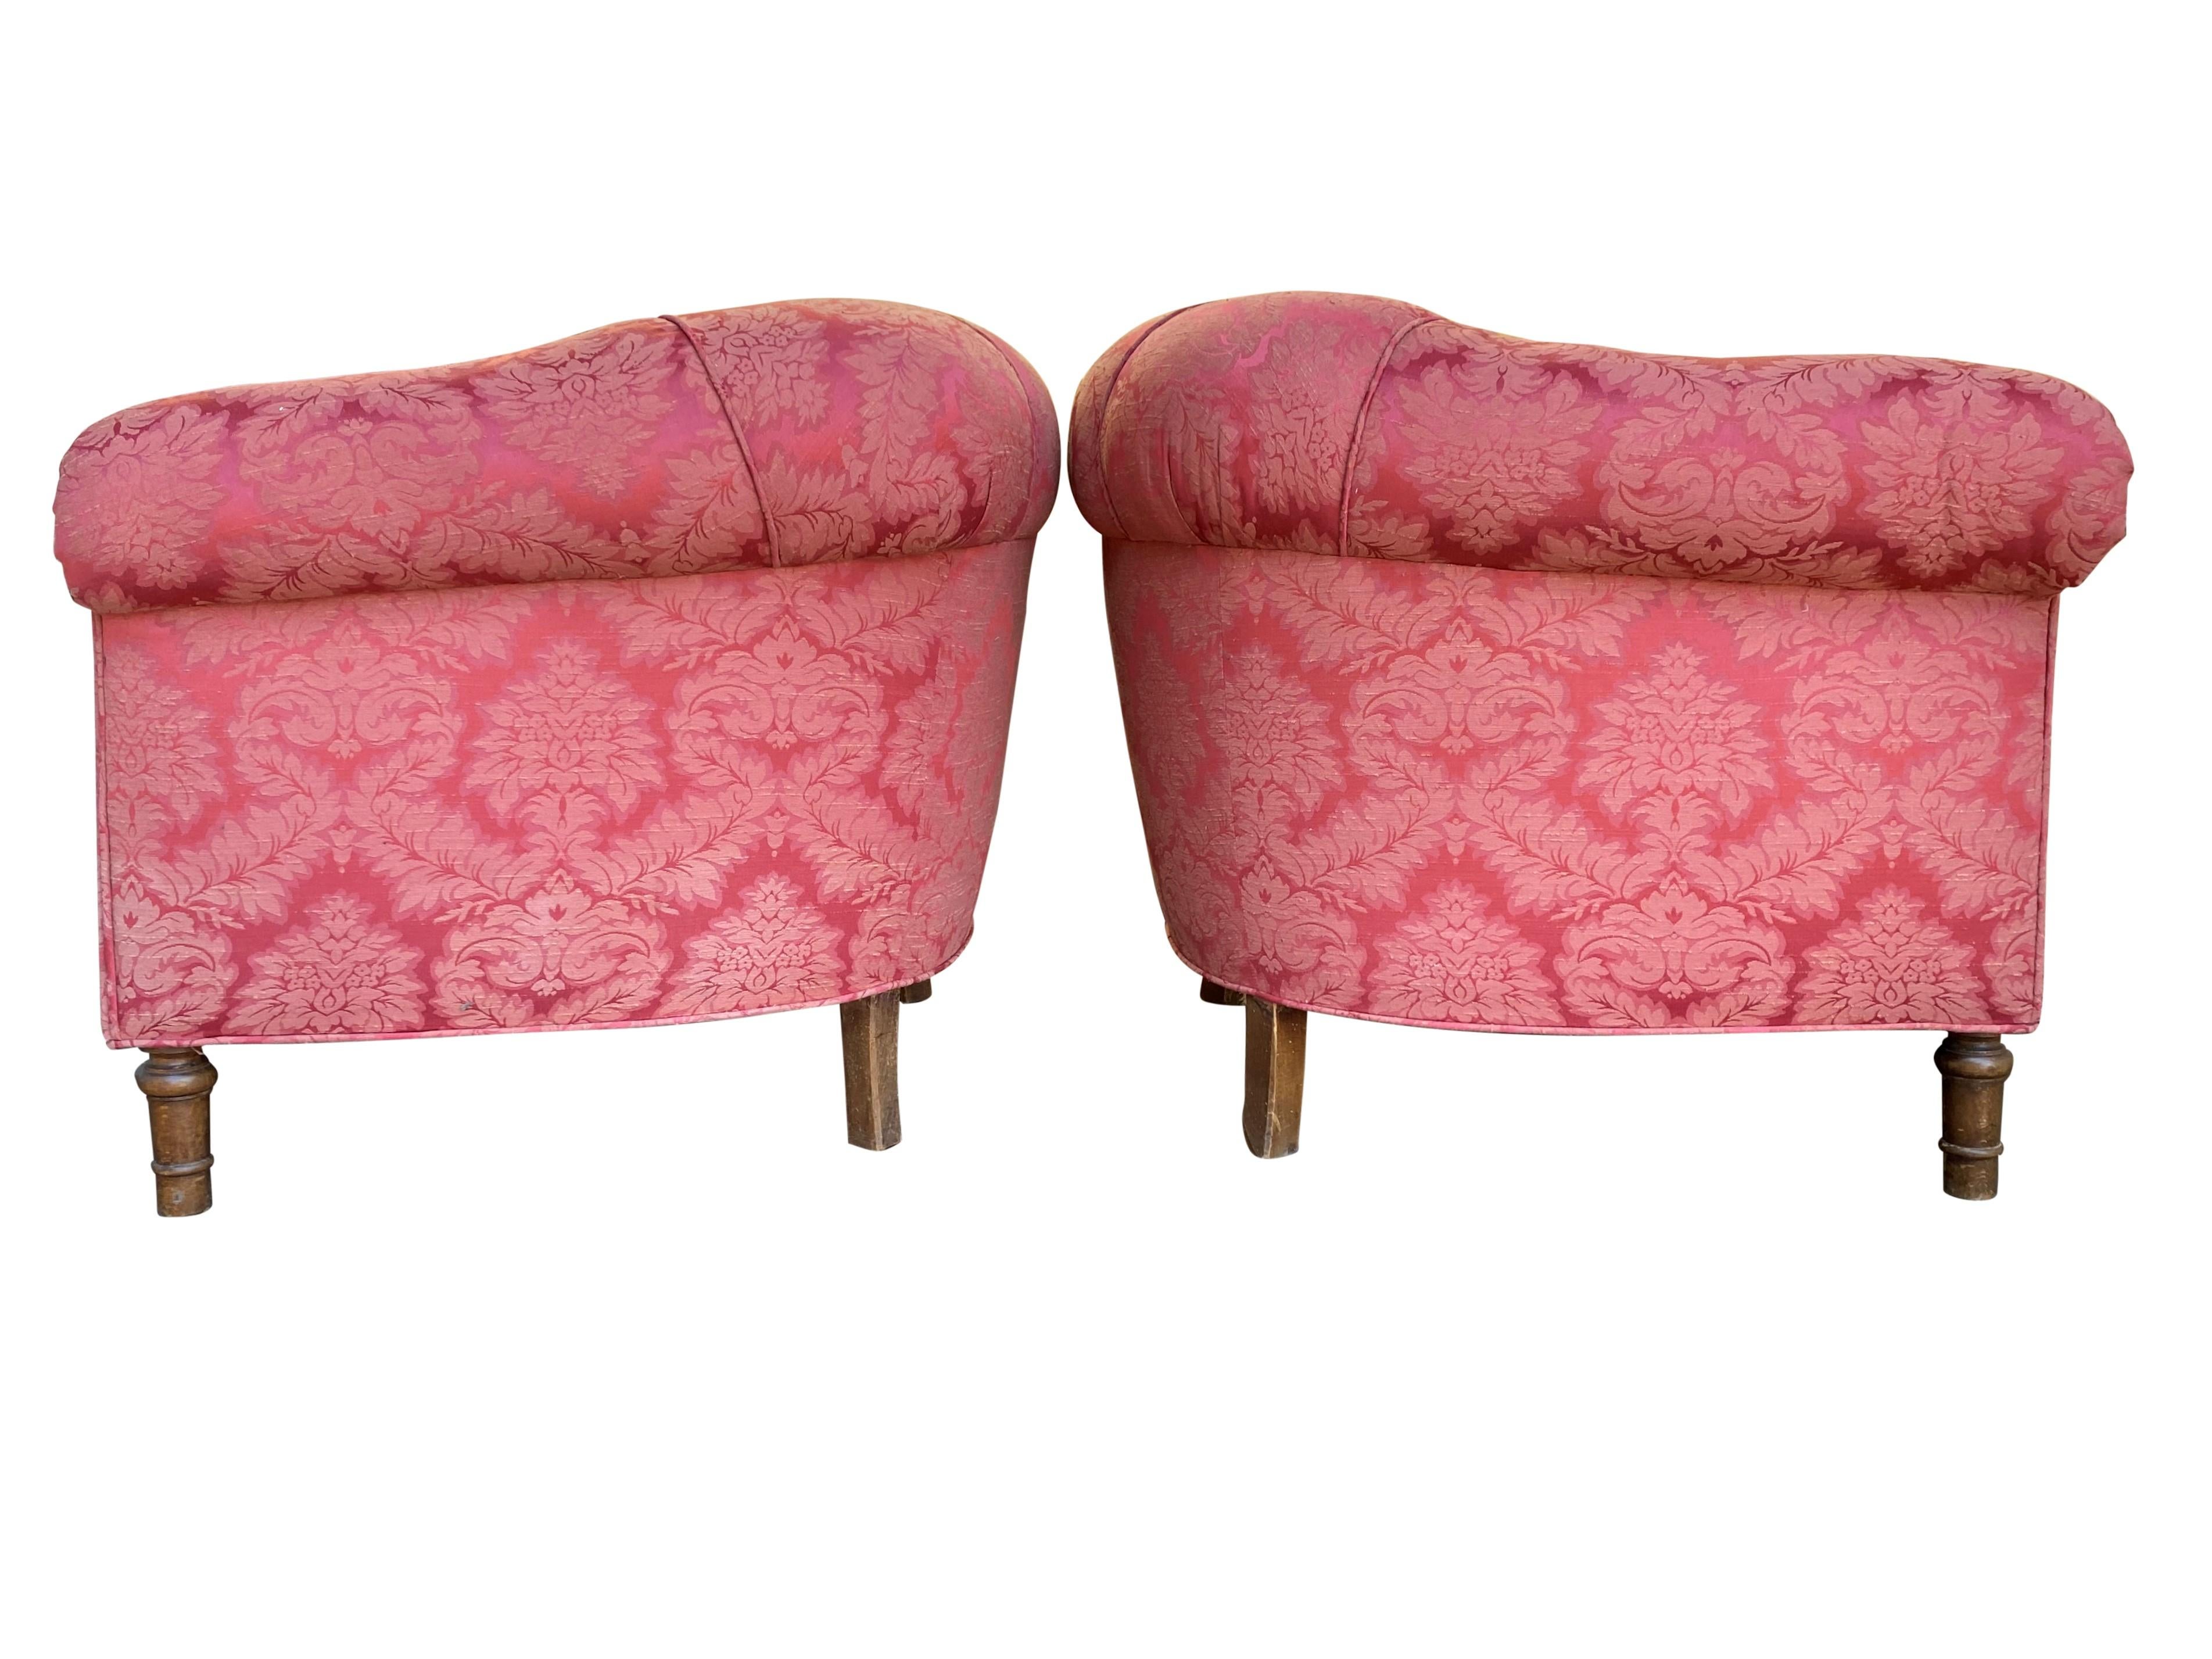 Pair of 1920s Club Chairs in Damask Floral Design For Sale 3